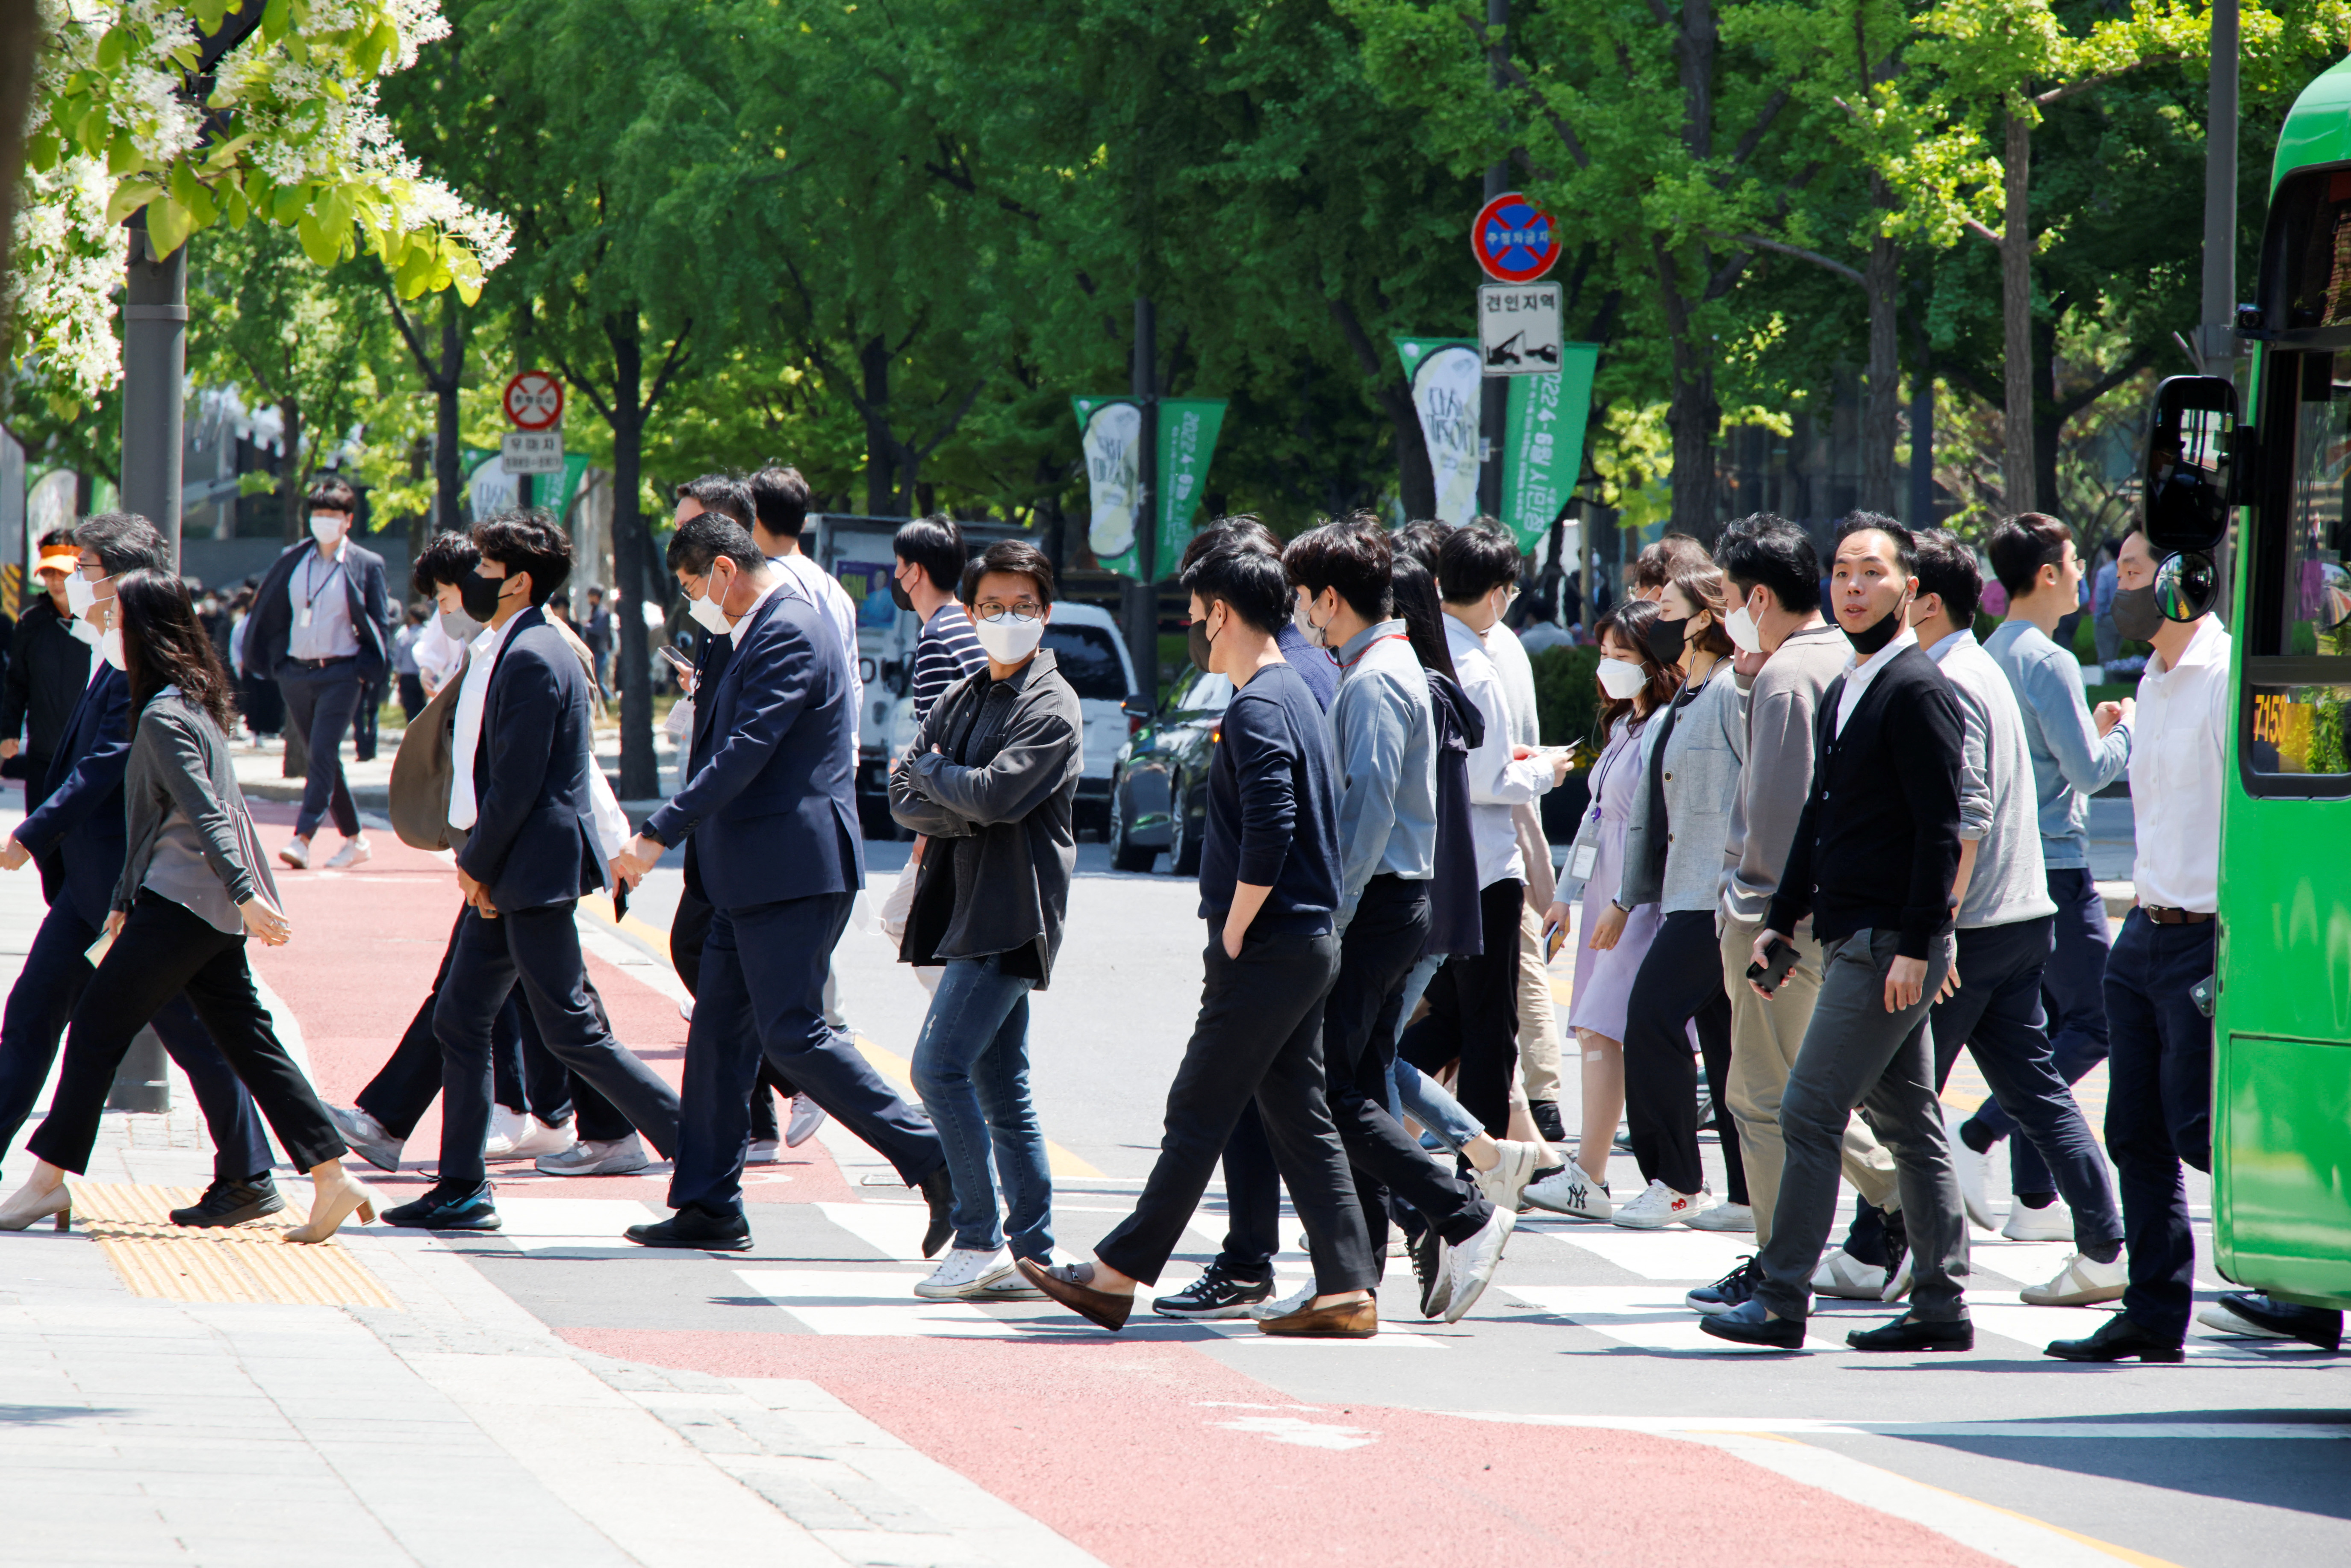 People wear masks to prevent the spread of the coronavirus disease (COVID-19) as they walk on zebra crossing in Seoul